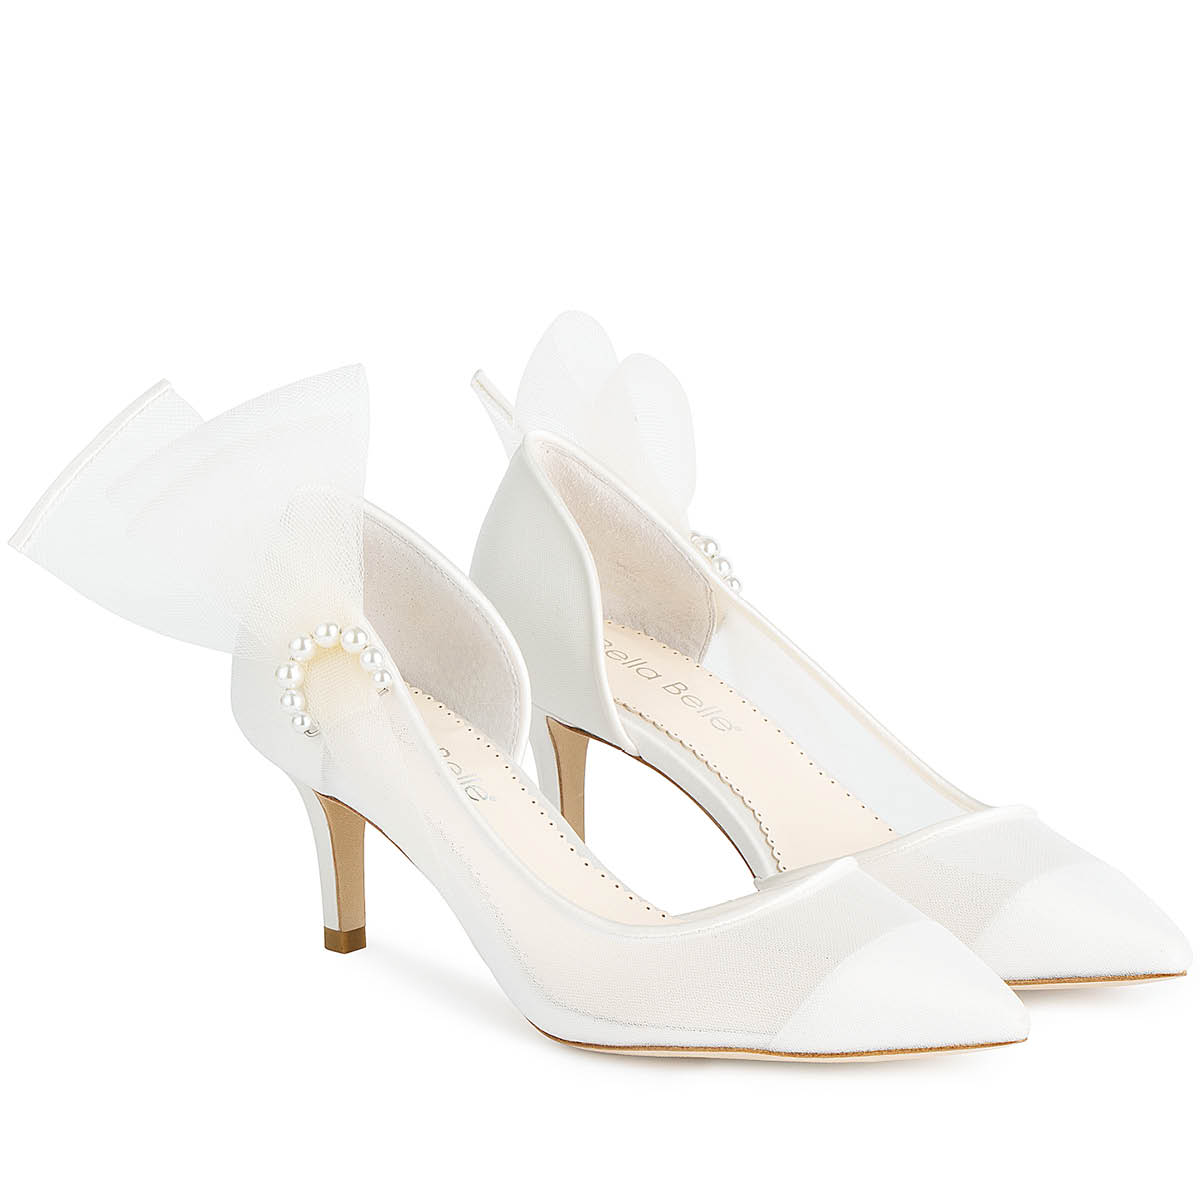 Peep Toe Sandals Low Heel Champagne Satin With Pleated Wedding Shoes